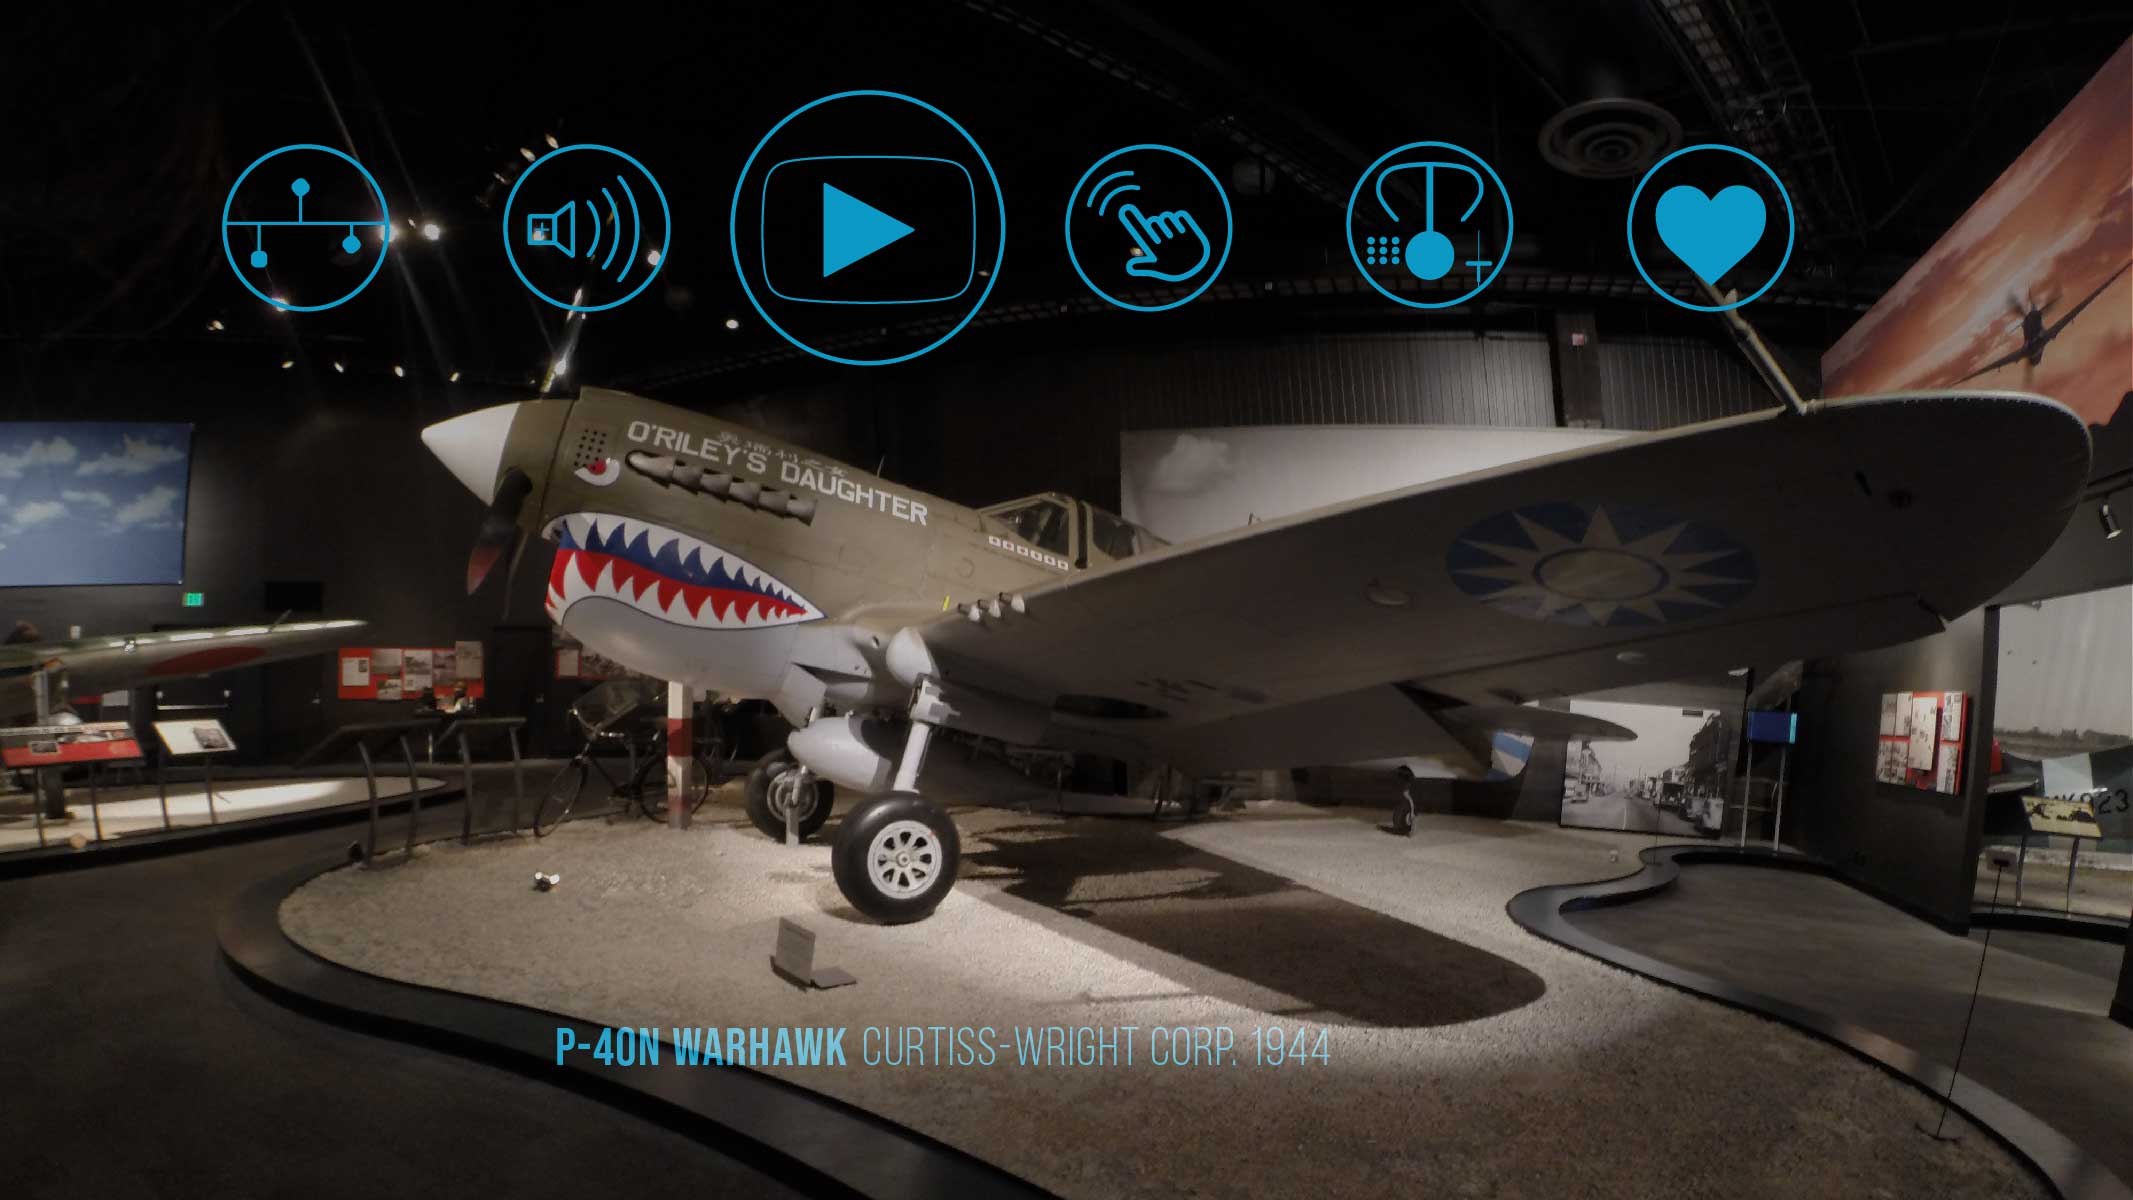 a mock-up image of the active/open state of the FARTHER AR exhibit interface overlayed on an exhibit at the Museum of Flight